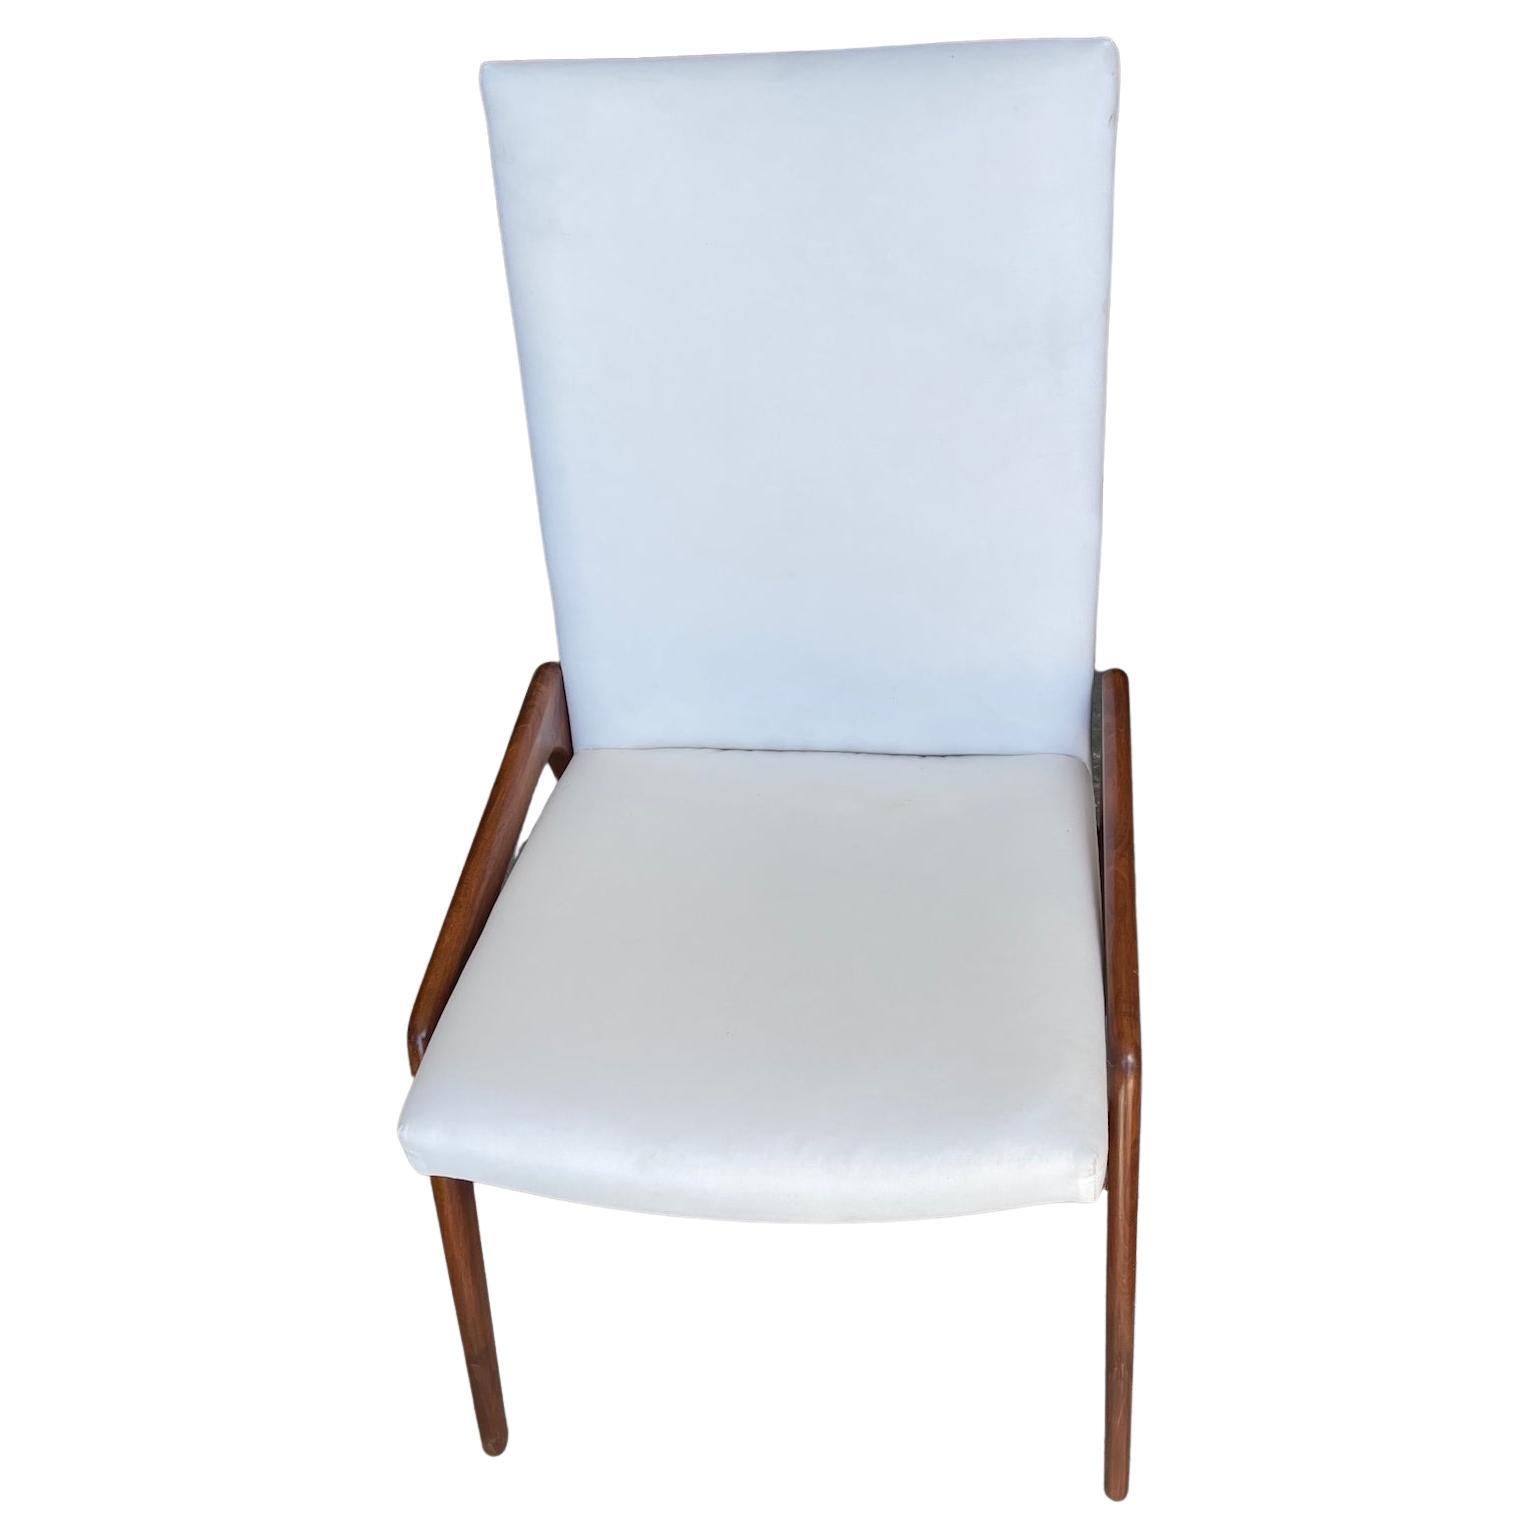 Reproduction Danish Style Alderwood Dining Chairs Upholstered For Sale